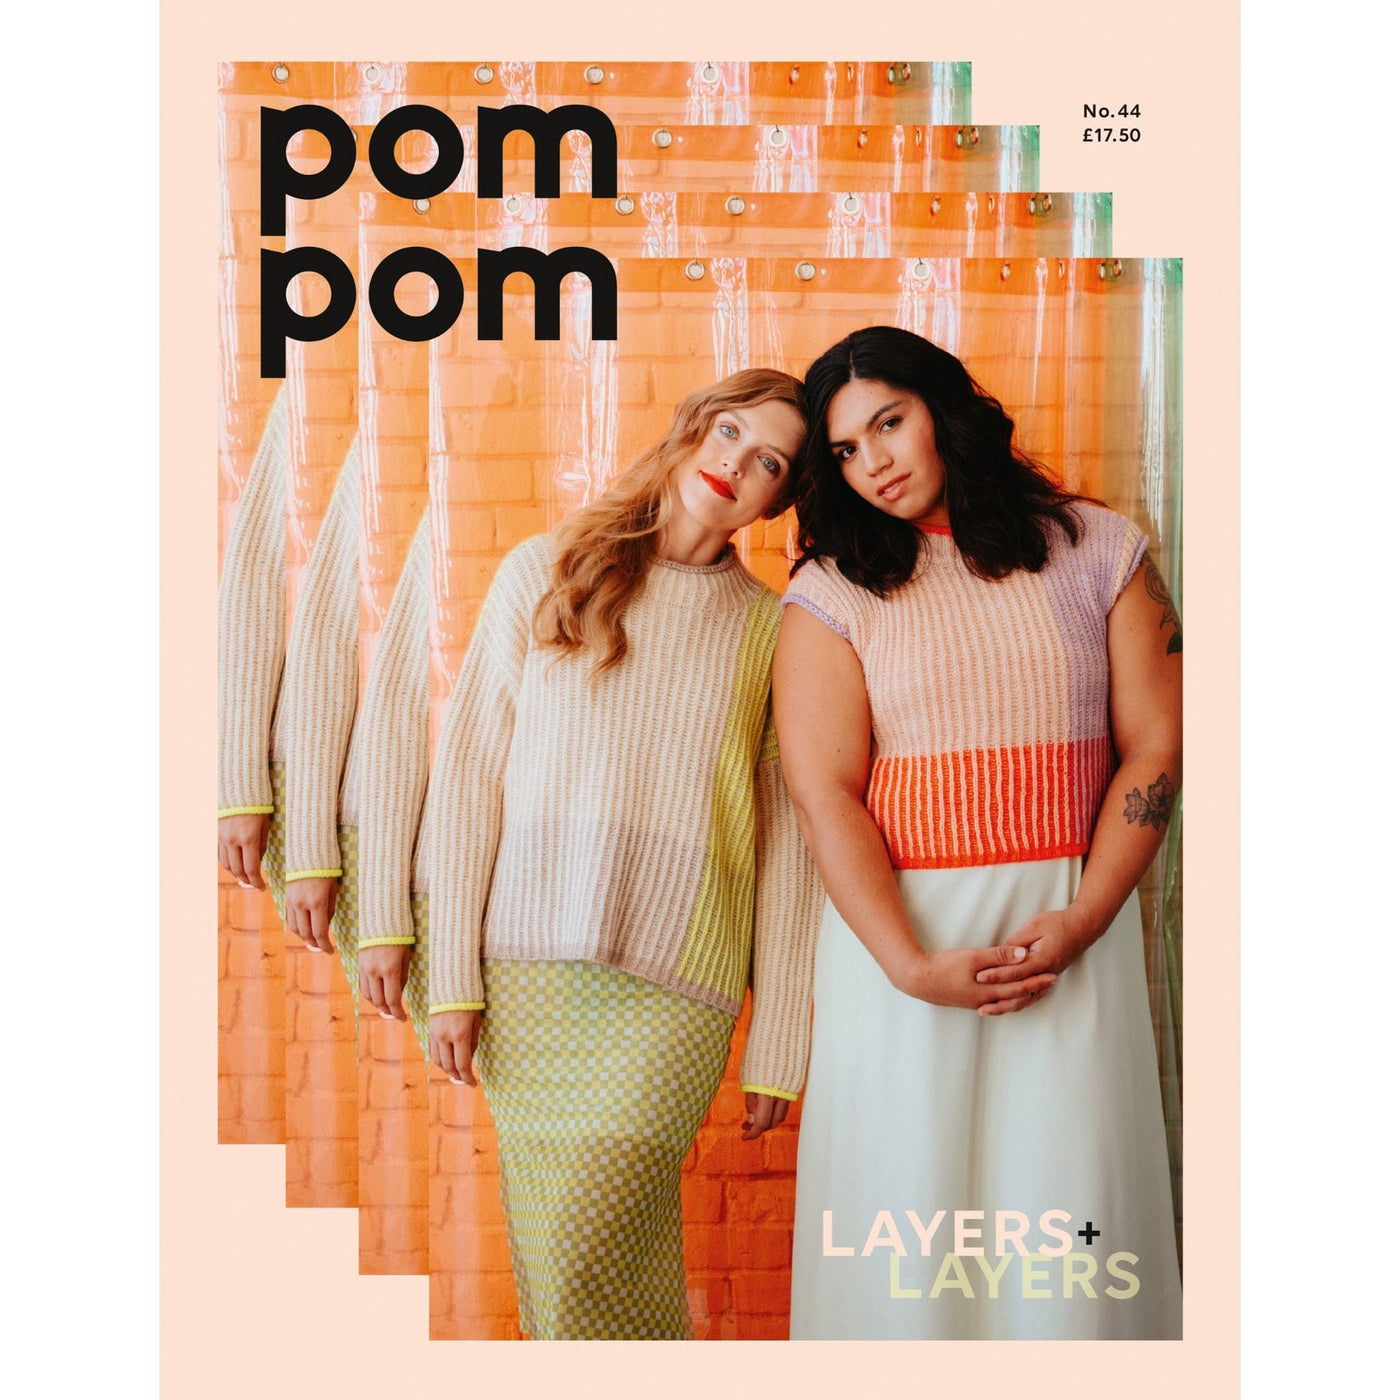 The cover of Pom Pom Issue 44 featuring to women wearing colorful knitwear sweaters stand together leaning on each other.